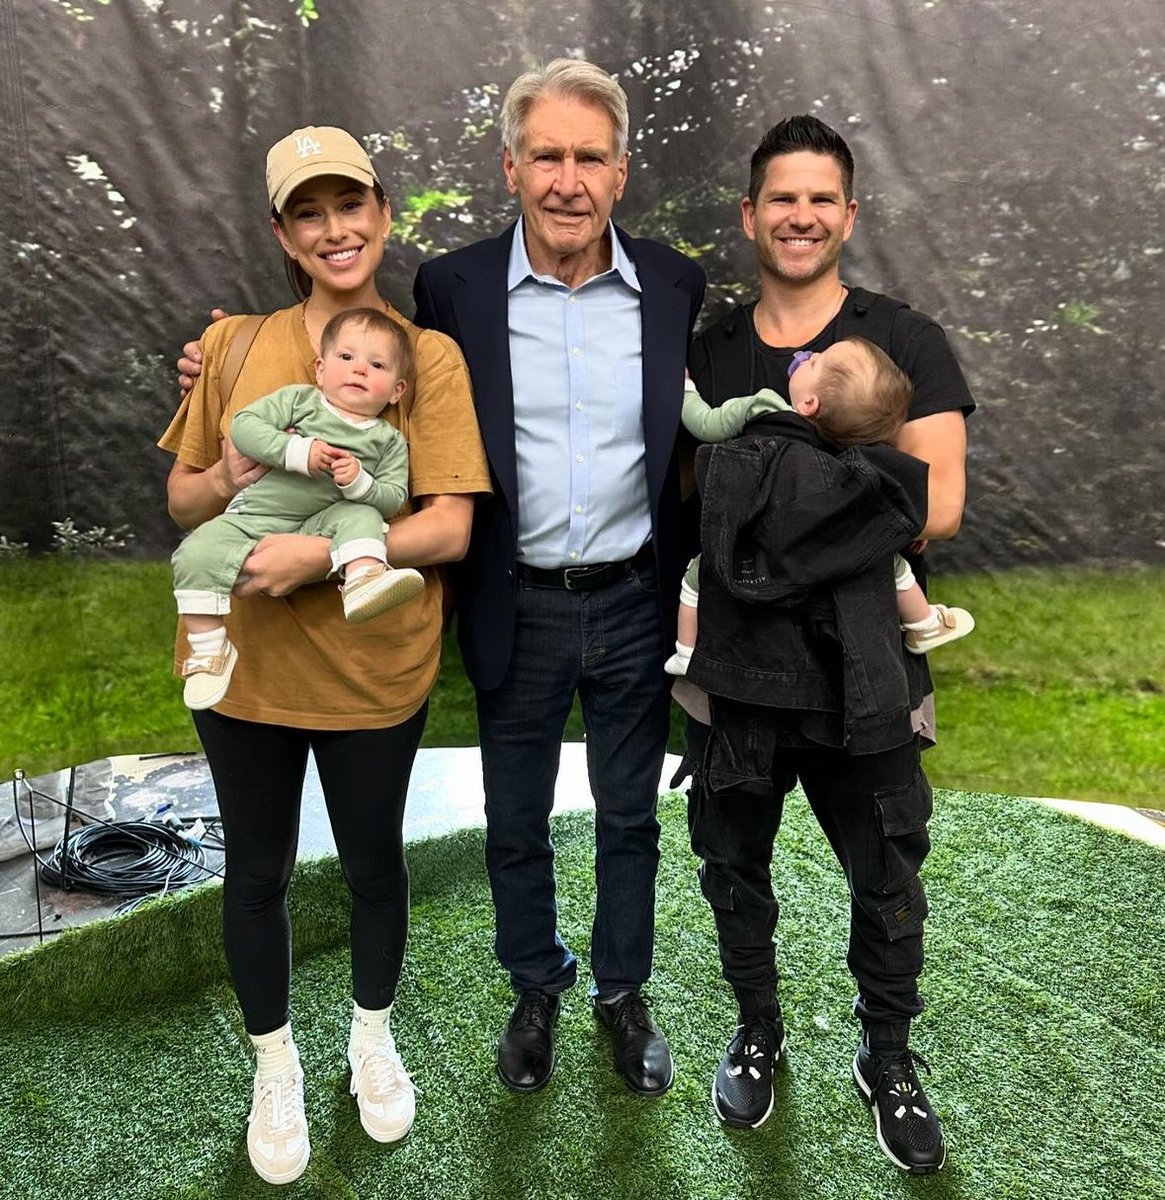 Nia & Danny with Six Days Seven Nights star Harrison Ford!